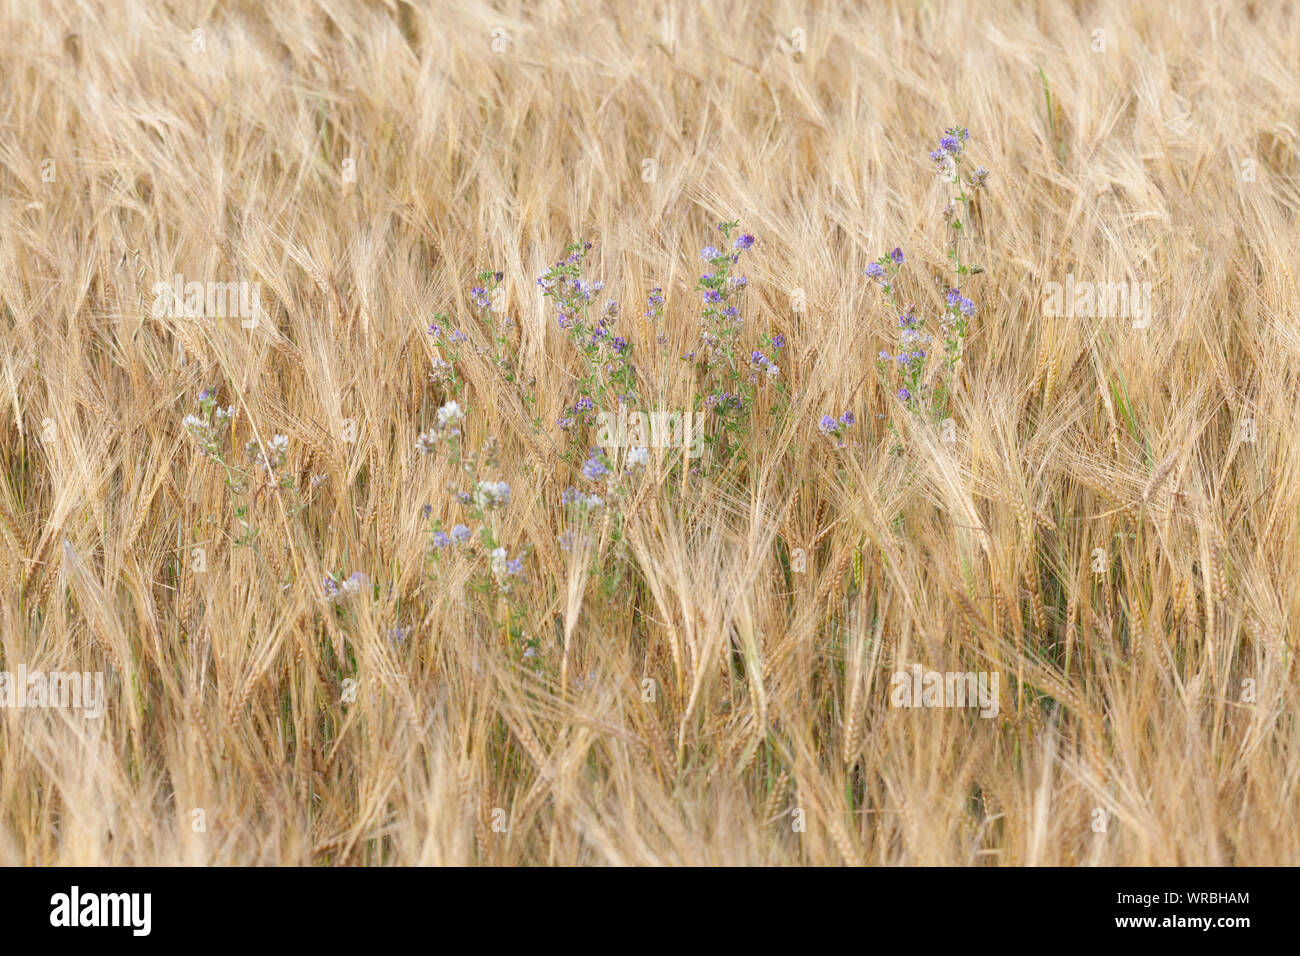 Weed with blue flowers in a rye field Stock Photo